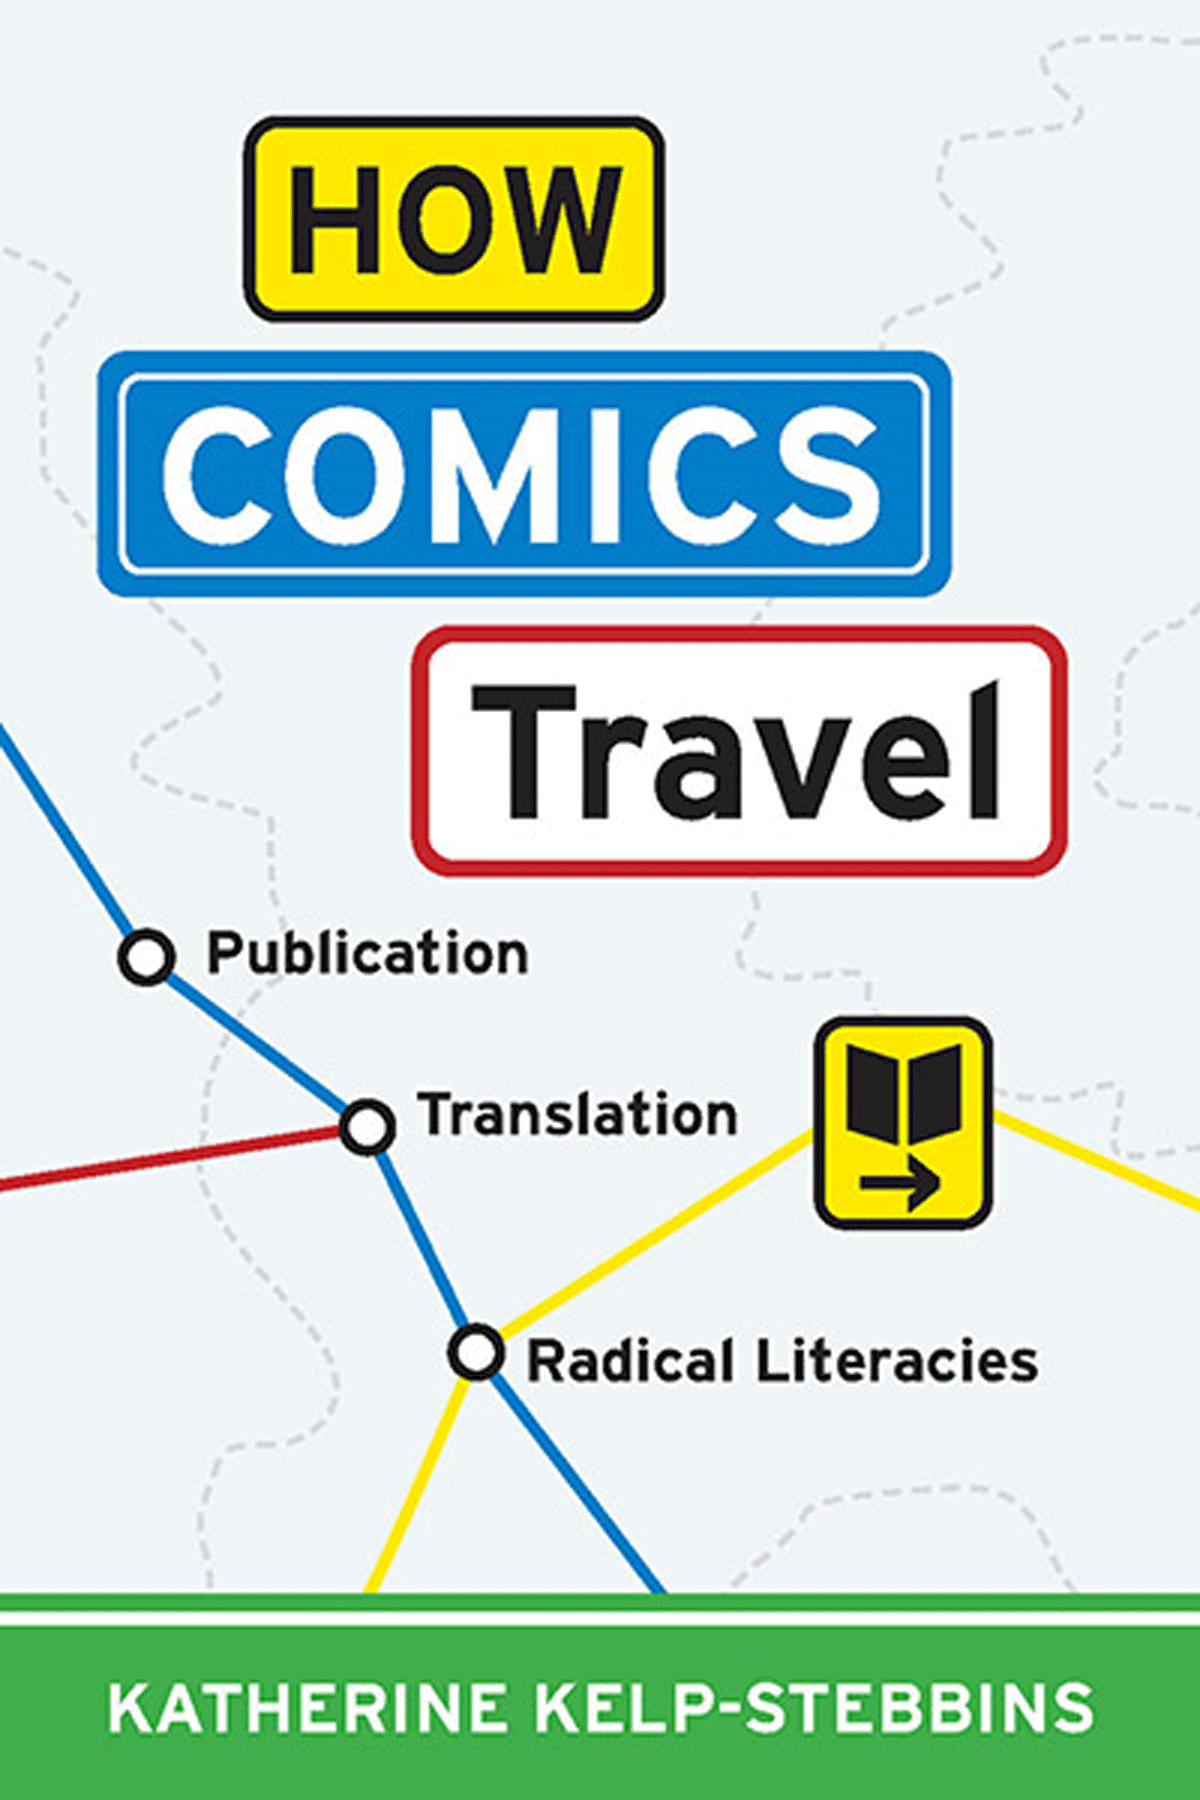 Mapping World Comics: A Review of How Comics Travel: Publication, Translation, Radical Literacies